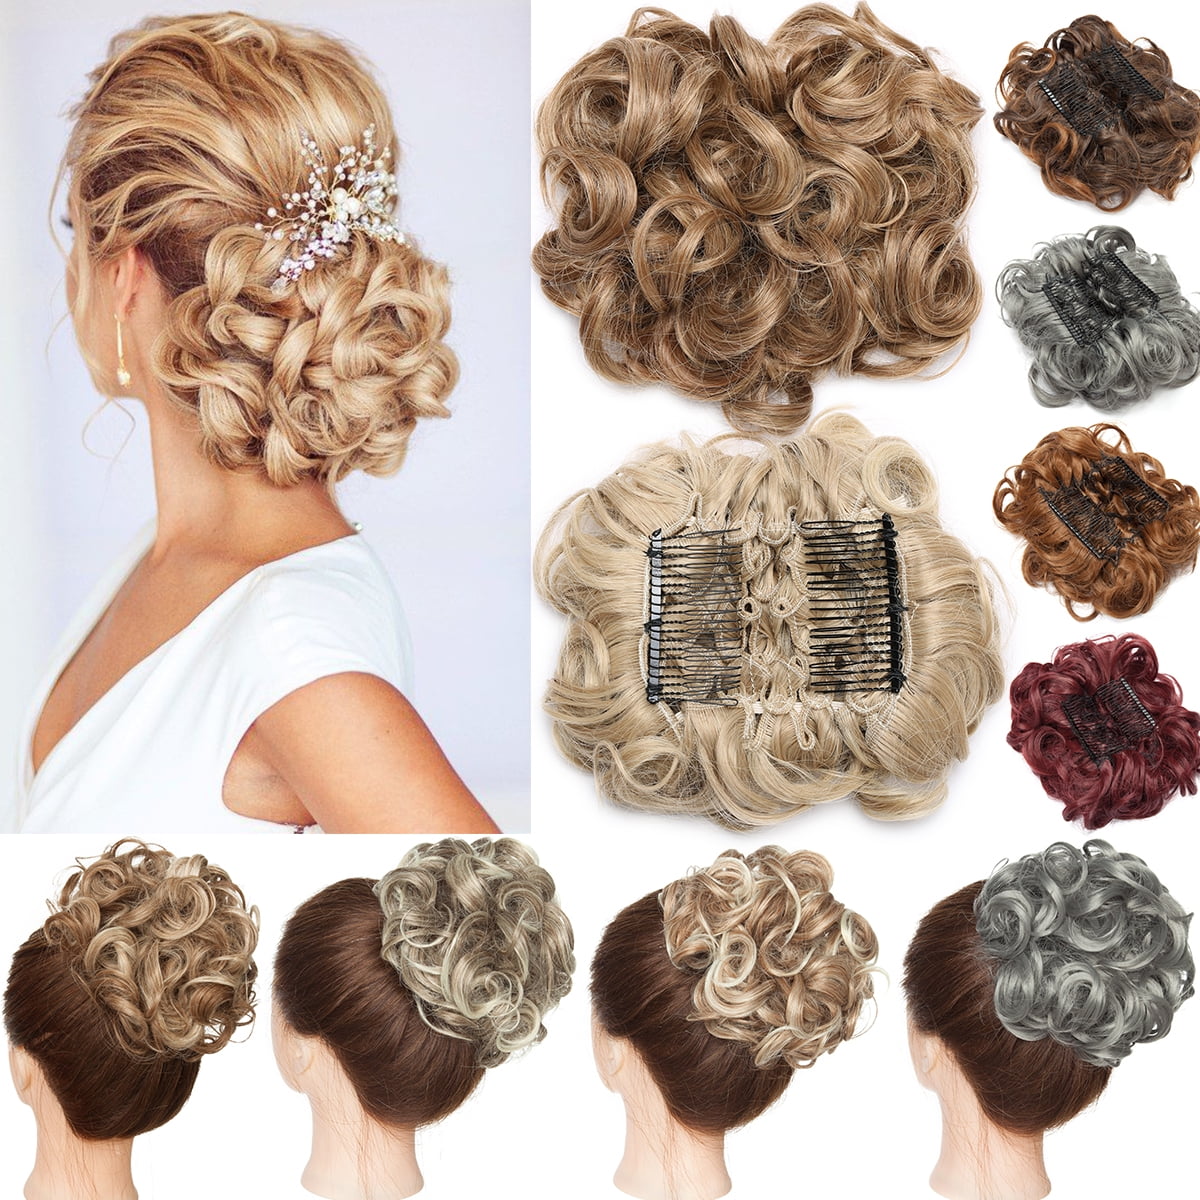 Easy Wedding Hairstyles With and Without Extensions - Luxy® Hair